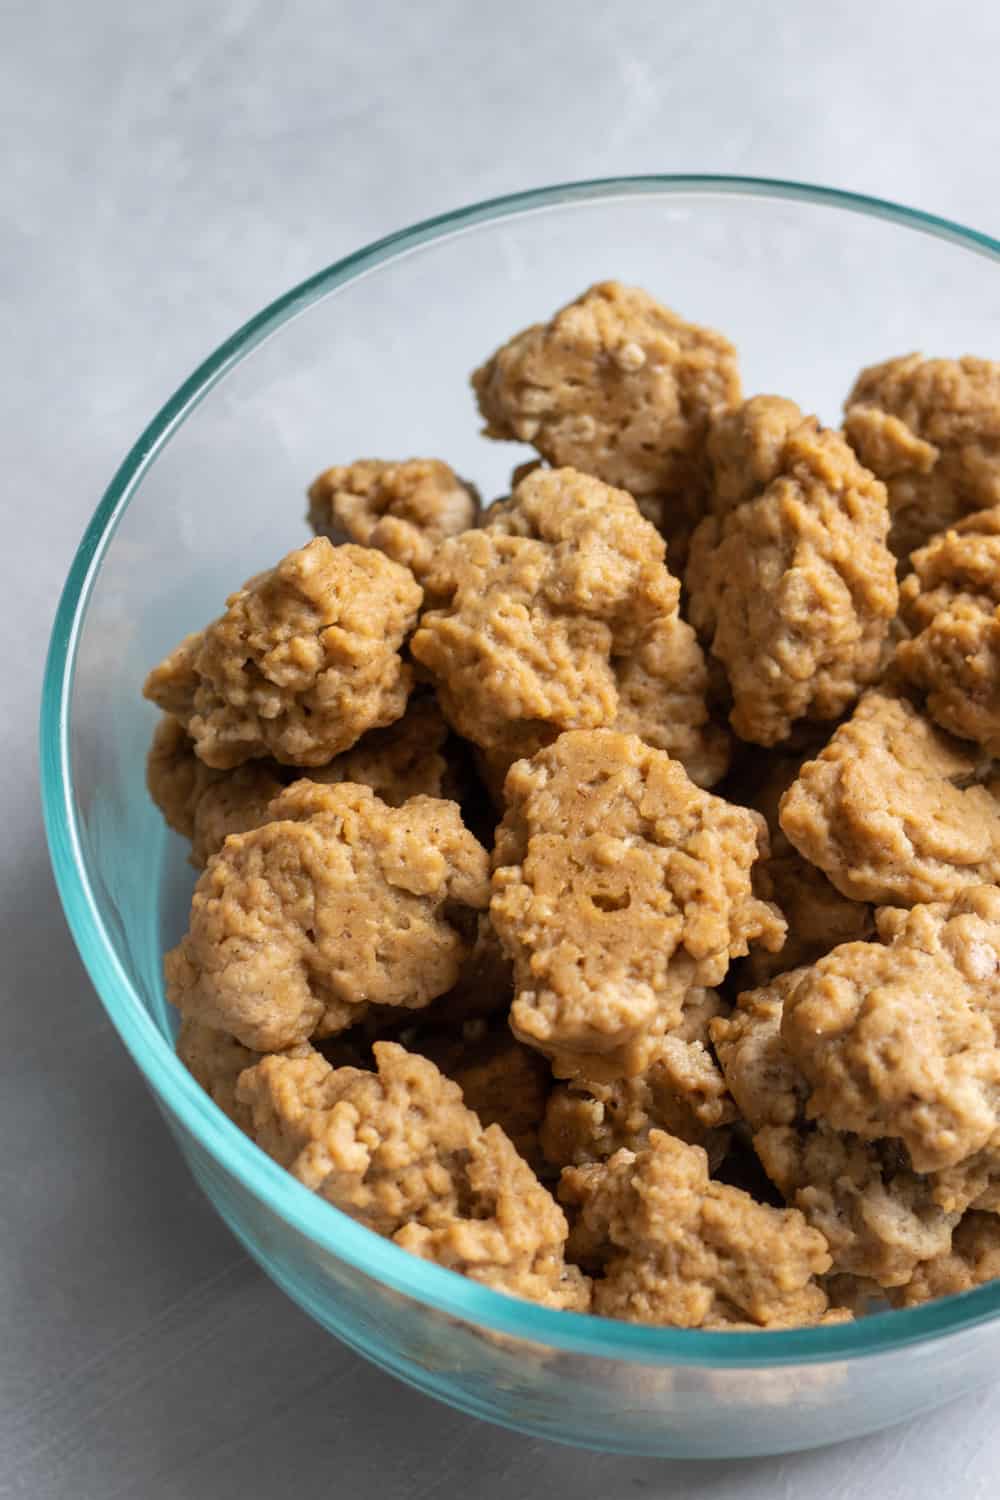 smaller pieces of steamed seitan, chunks or nuggets.